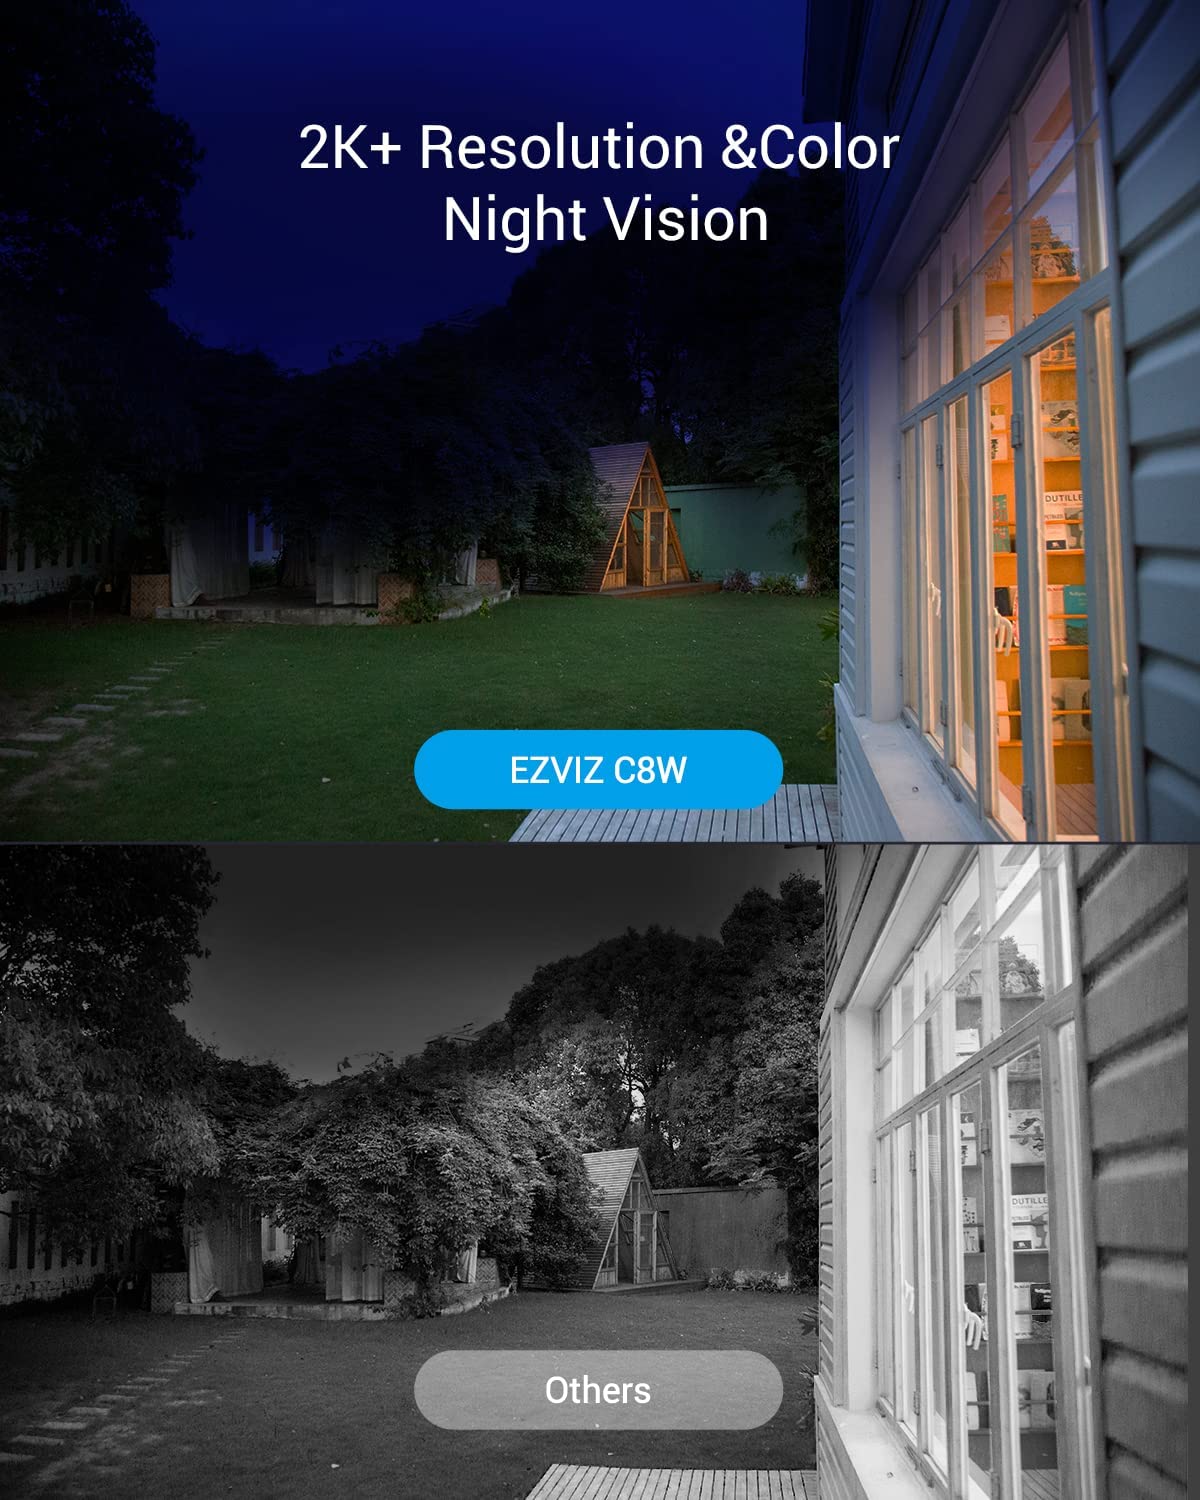 EZVIZ Security Camera Outdoor, 4MP WiFi Camera Pan/Tilt, 360° Visual Coverage, IP65 Waterproof, Color Night Vision, AI-Powered Person Detection, Two-Way Talk, Support MicroSD Card up to 256GB | C8W C8W-4MP Color Night Vision